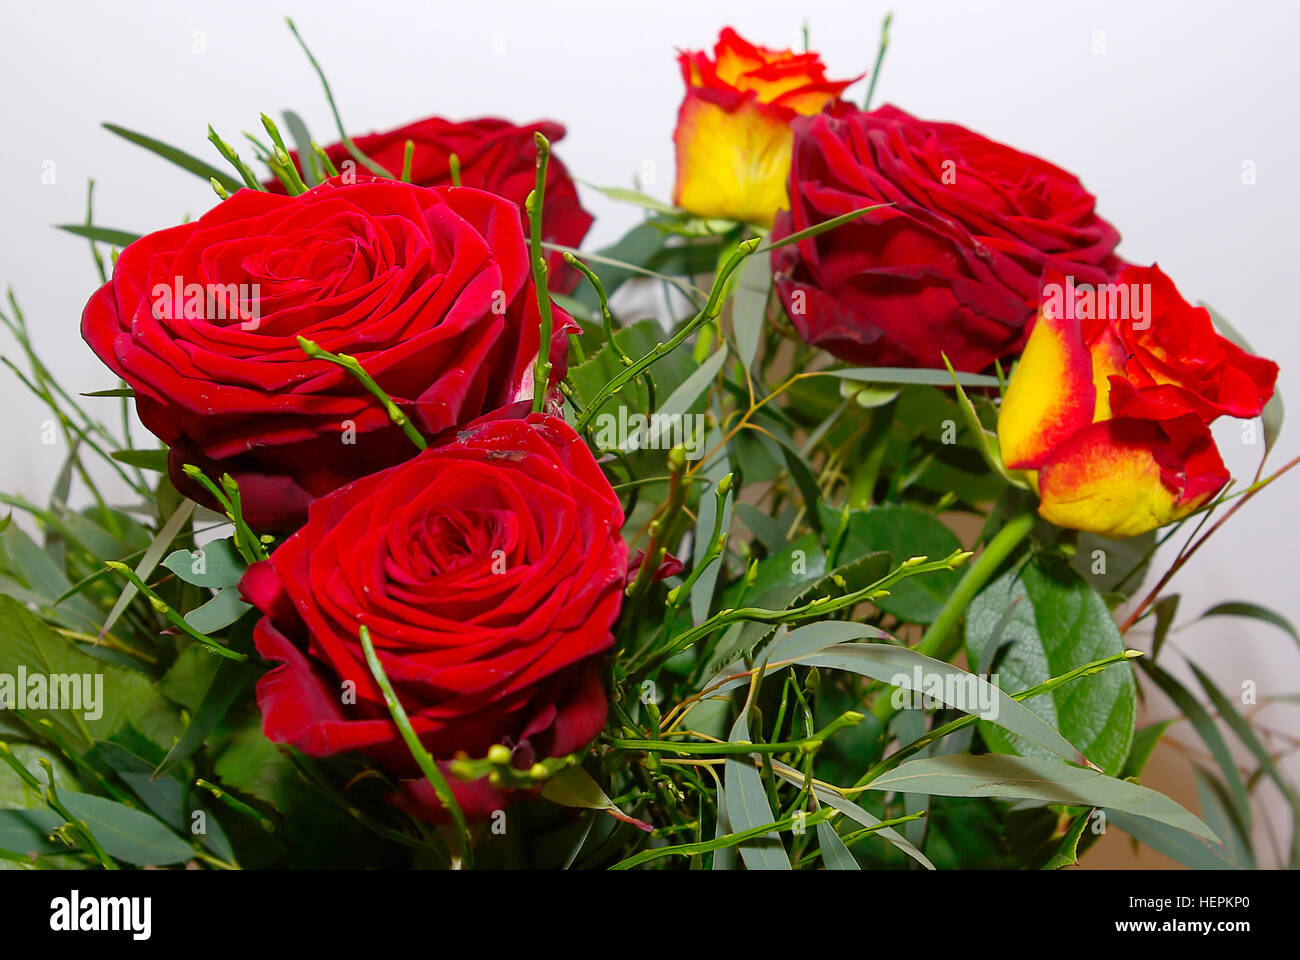 Cut flowers, bouquet of red roses. Stock Photo